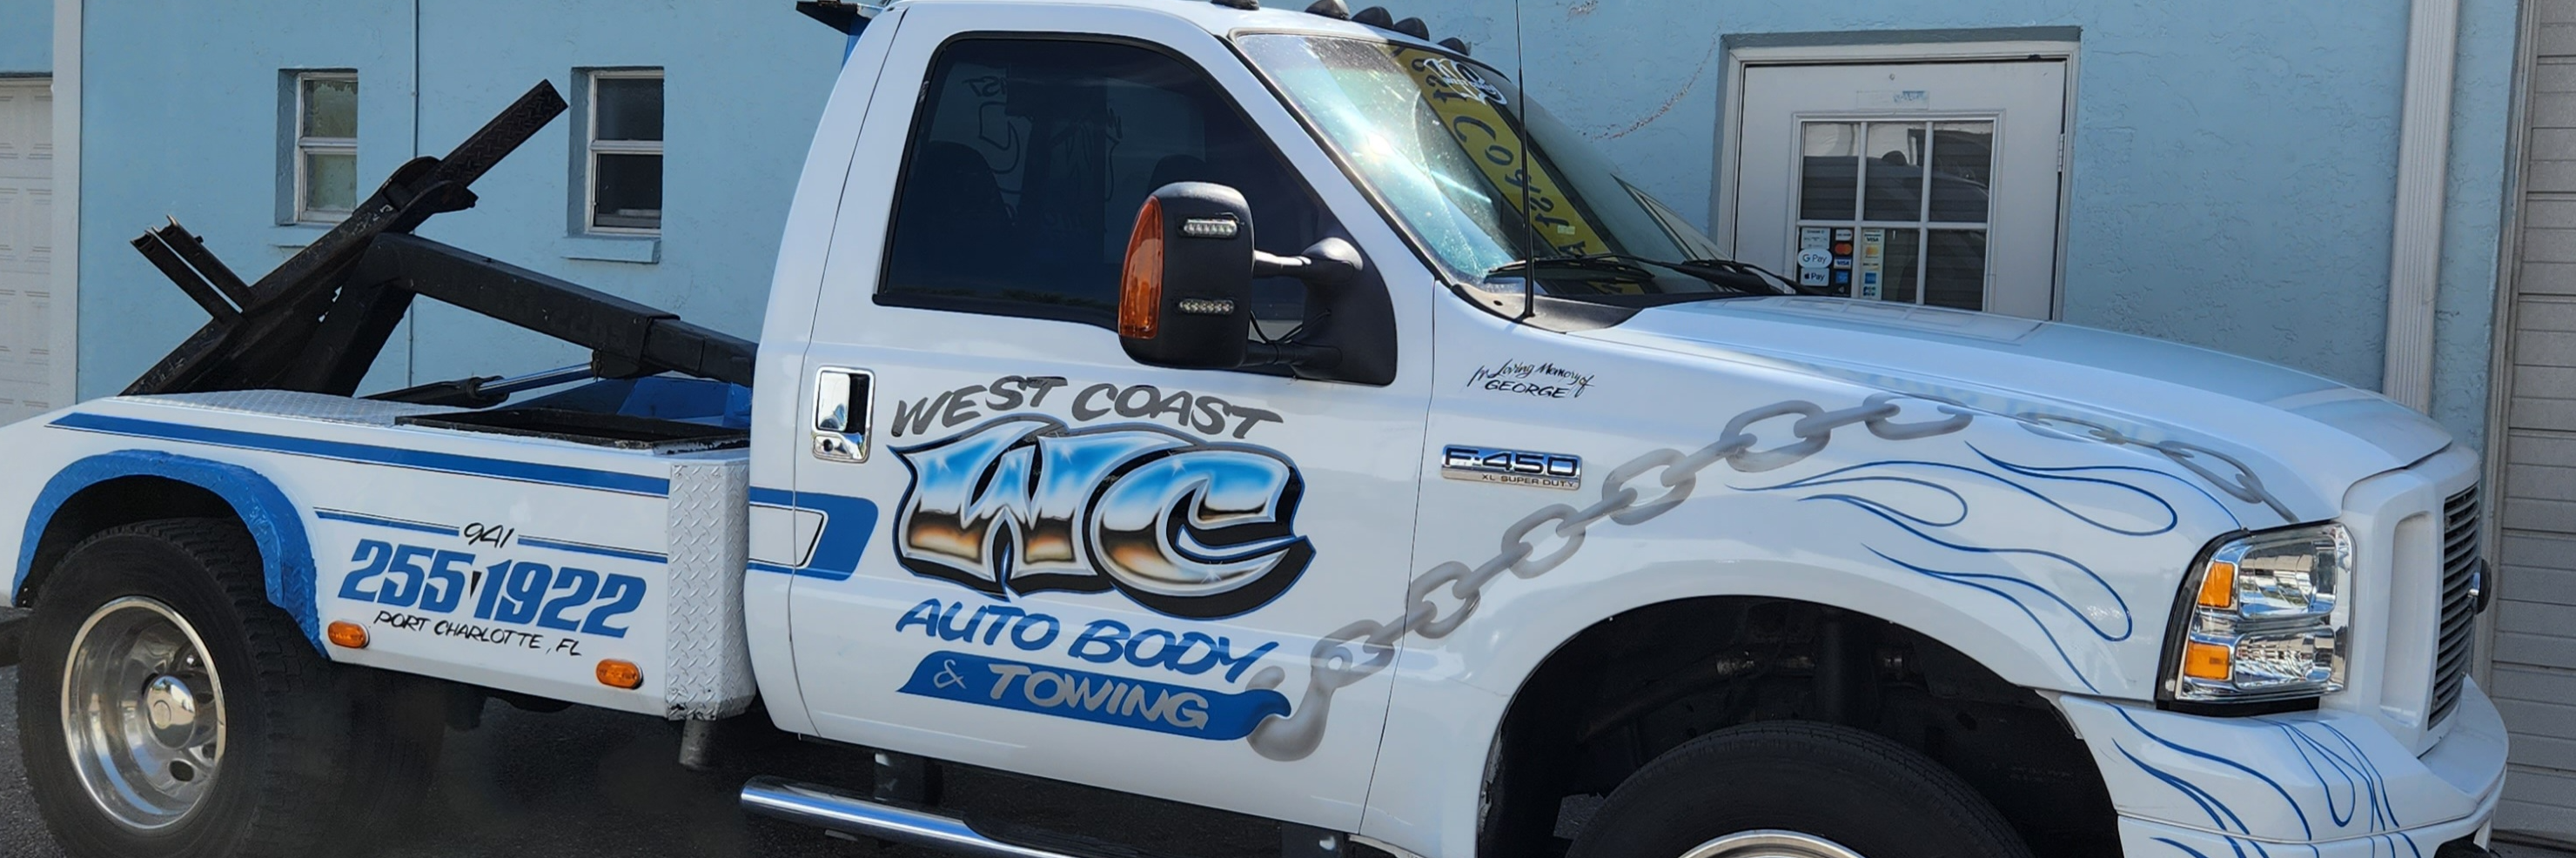 WEST COAST AUTO BODY TOWING Towing.com Profile Banner